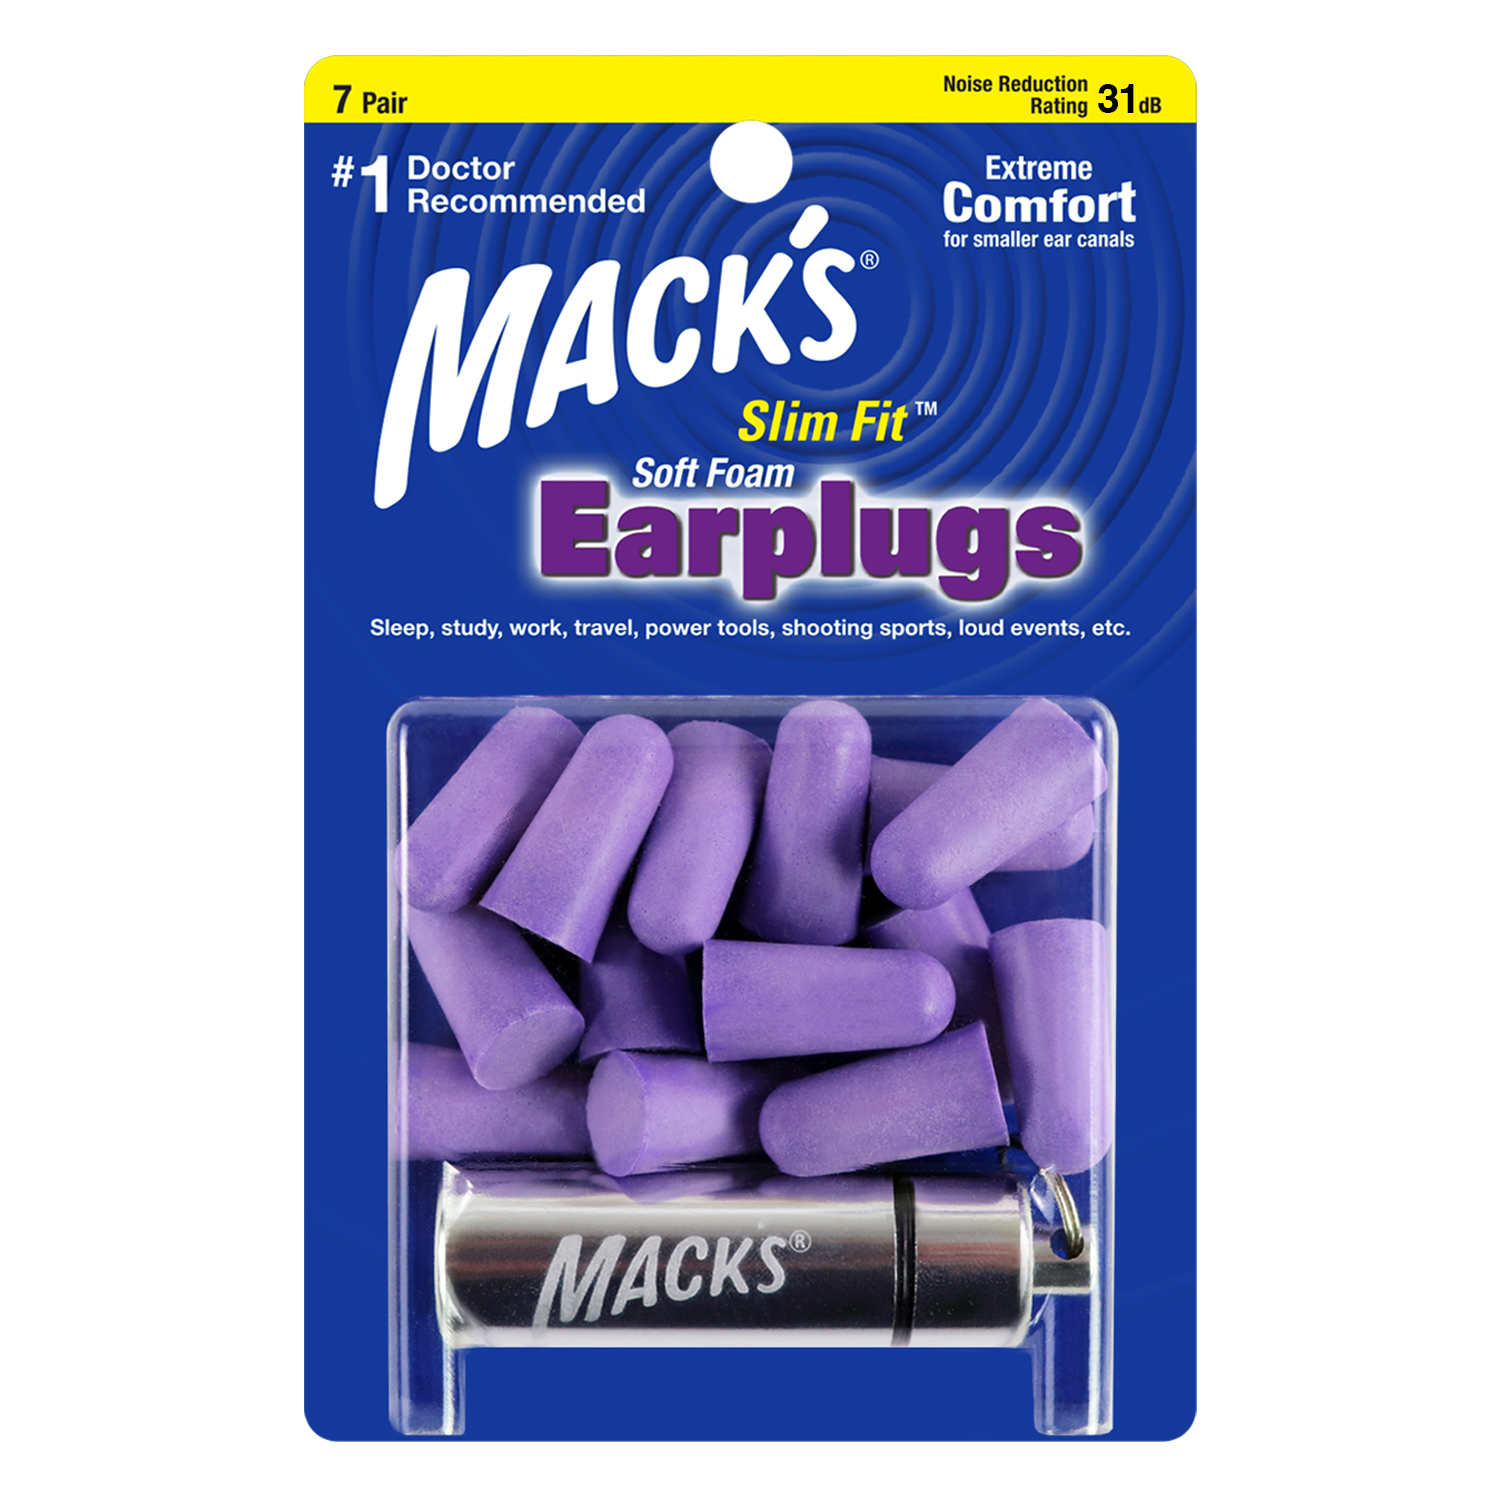 Macks earplugs slim fit ear plugs made for smaller ear canals and sensitive ears 31 db